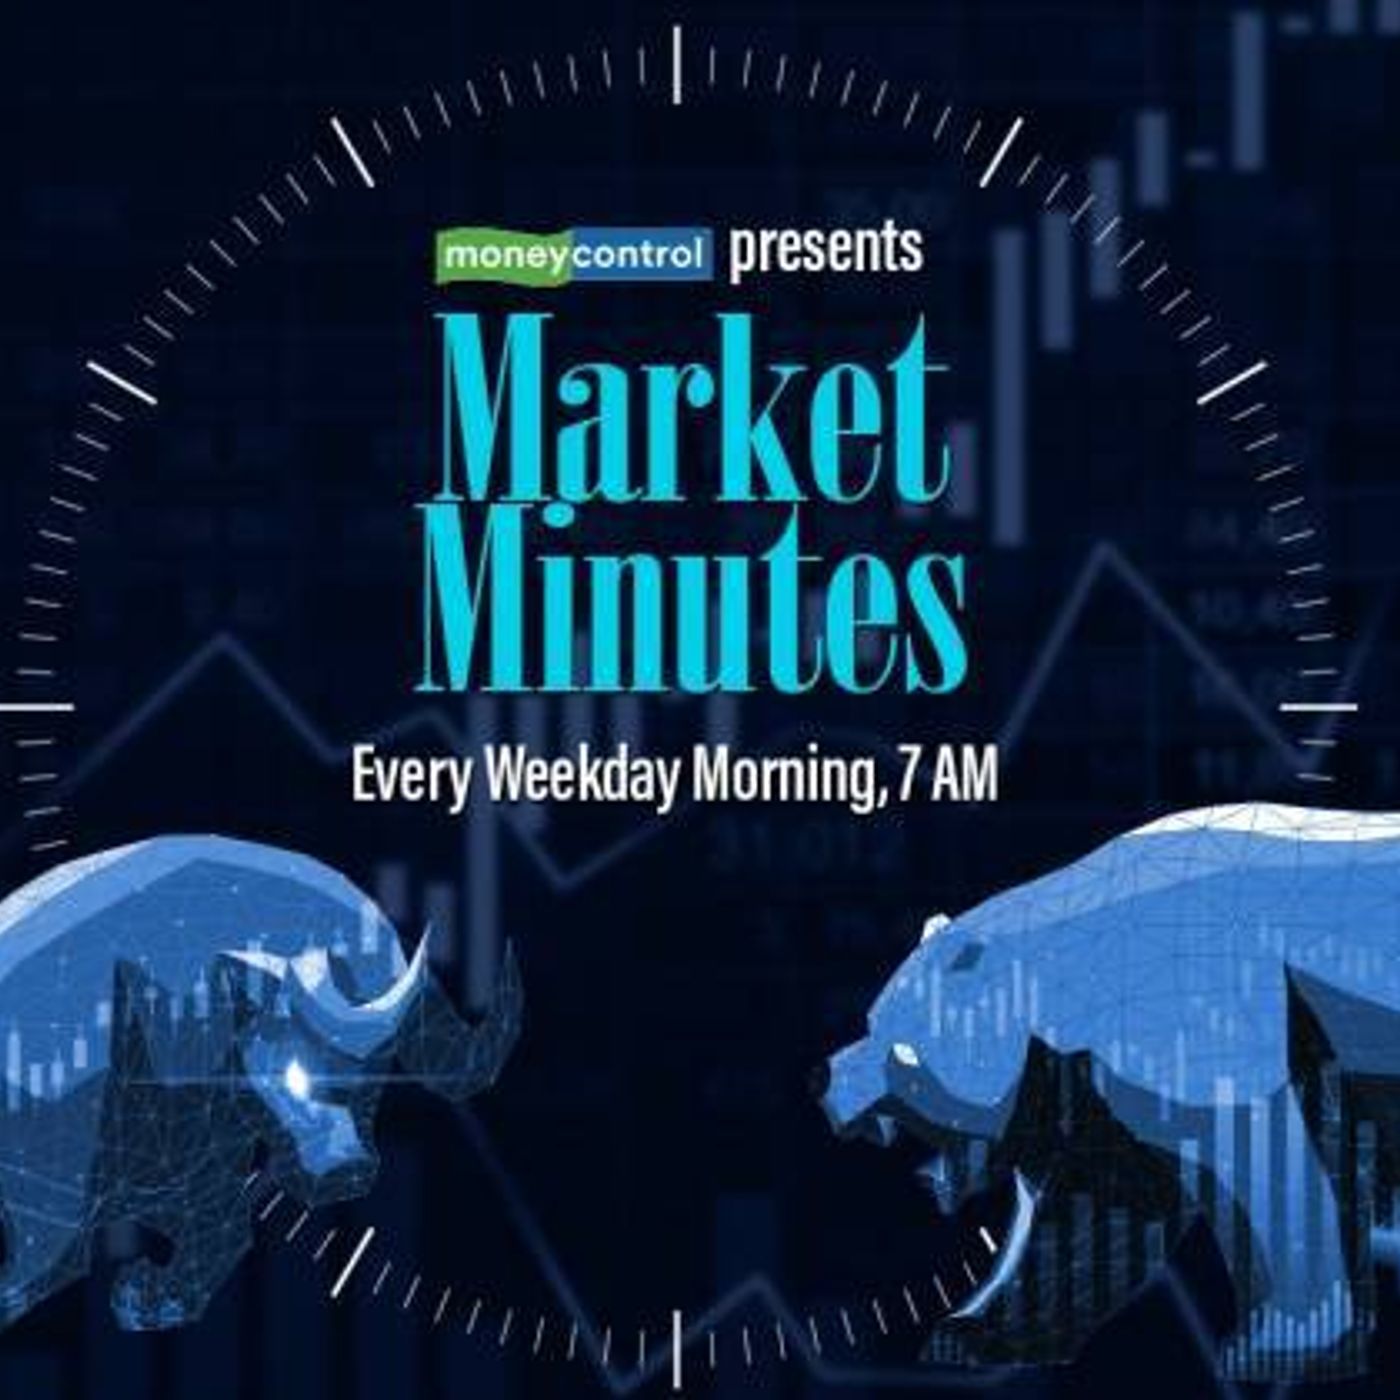 4217: US inflation print, Fed’s rate cut trajectory and breaks on Nifty’s record run | Market Minutes